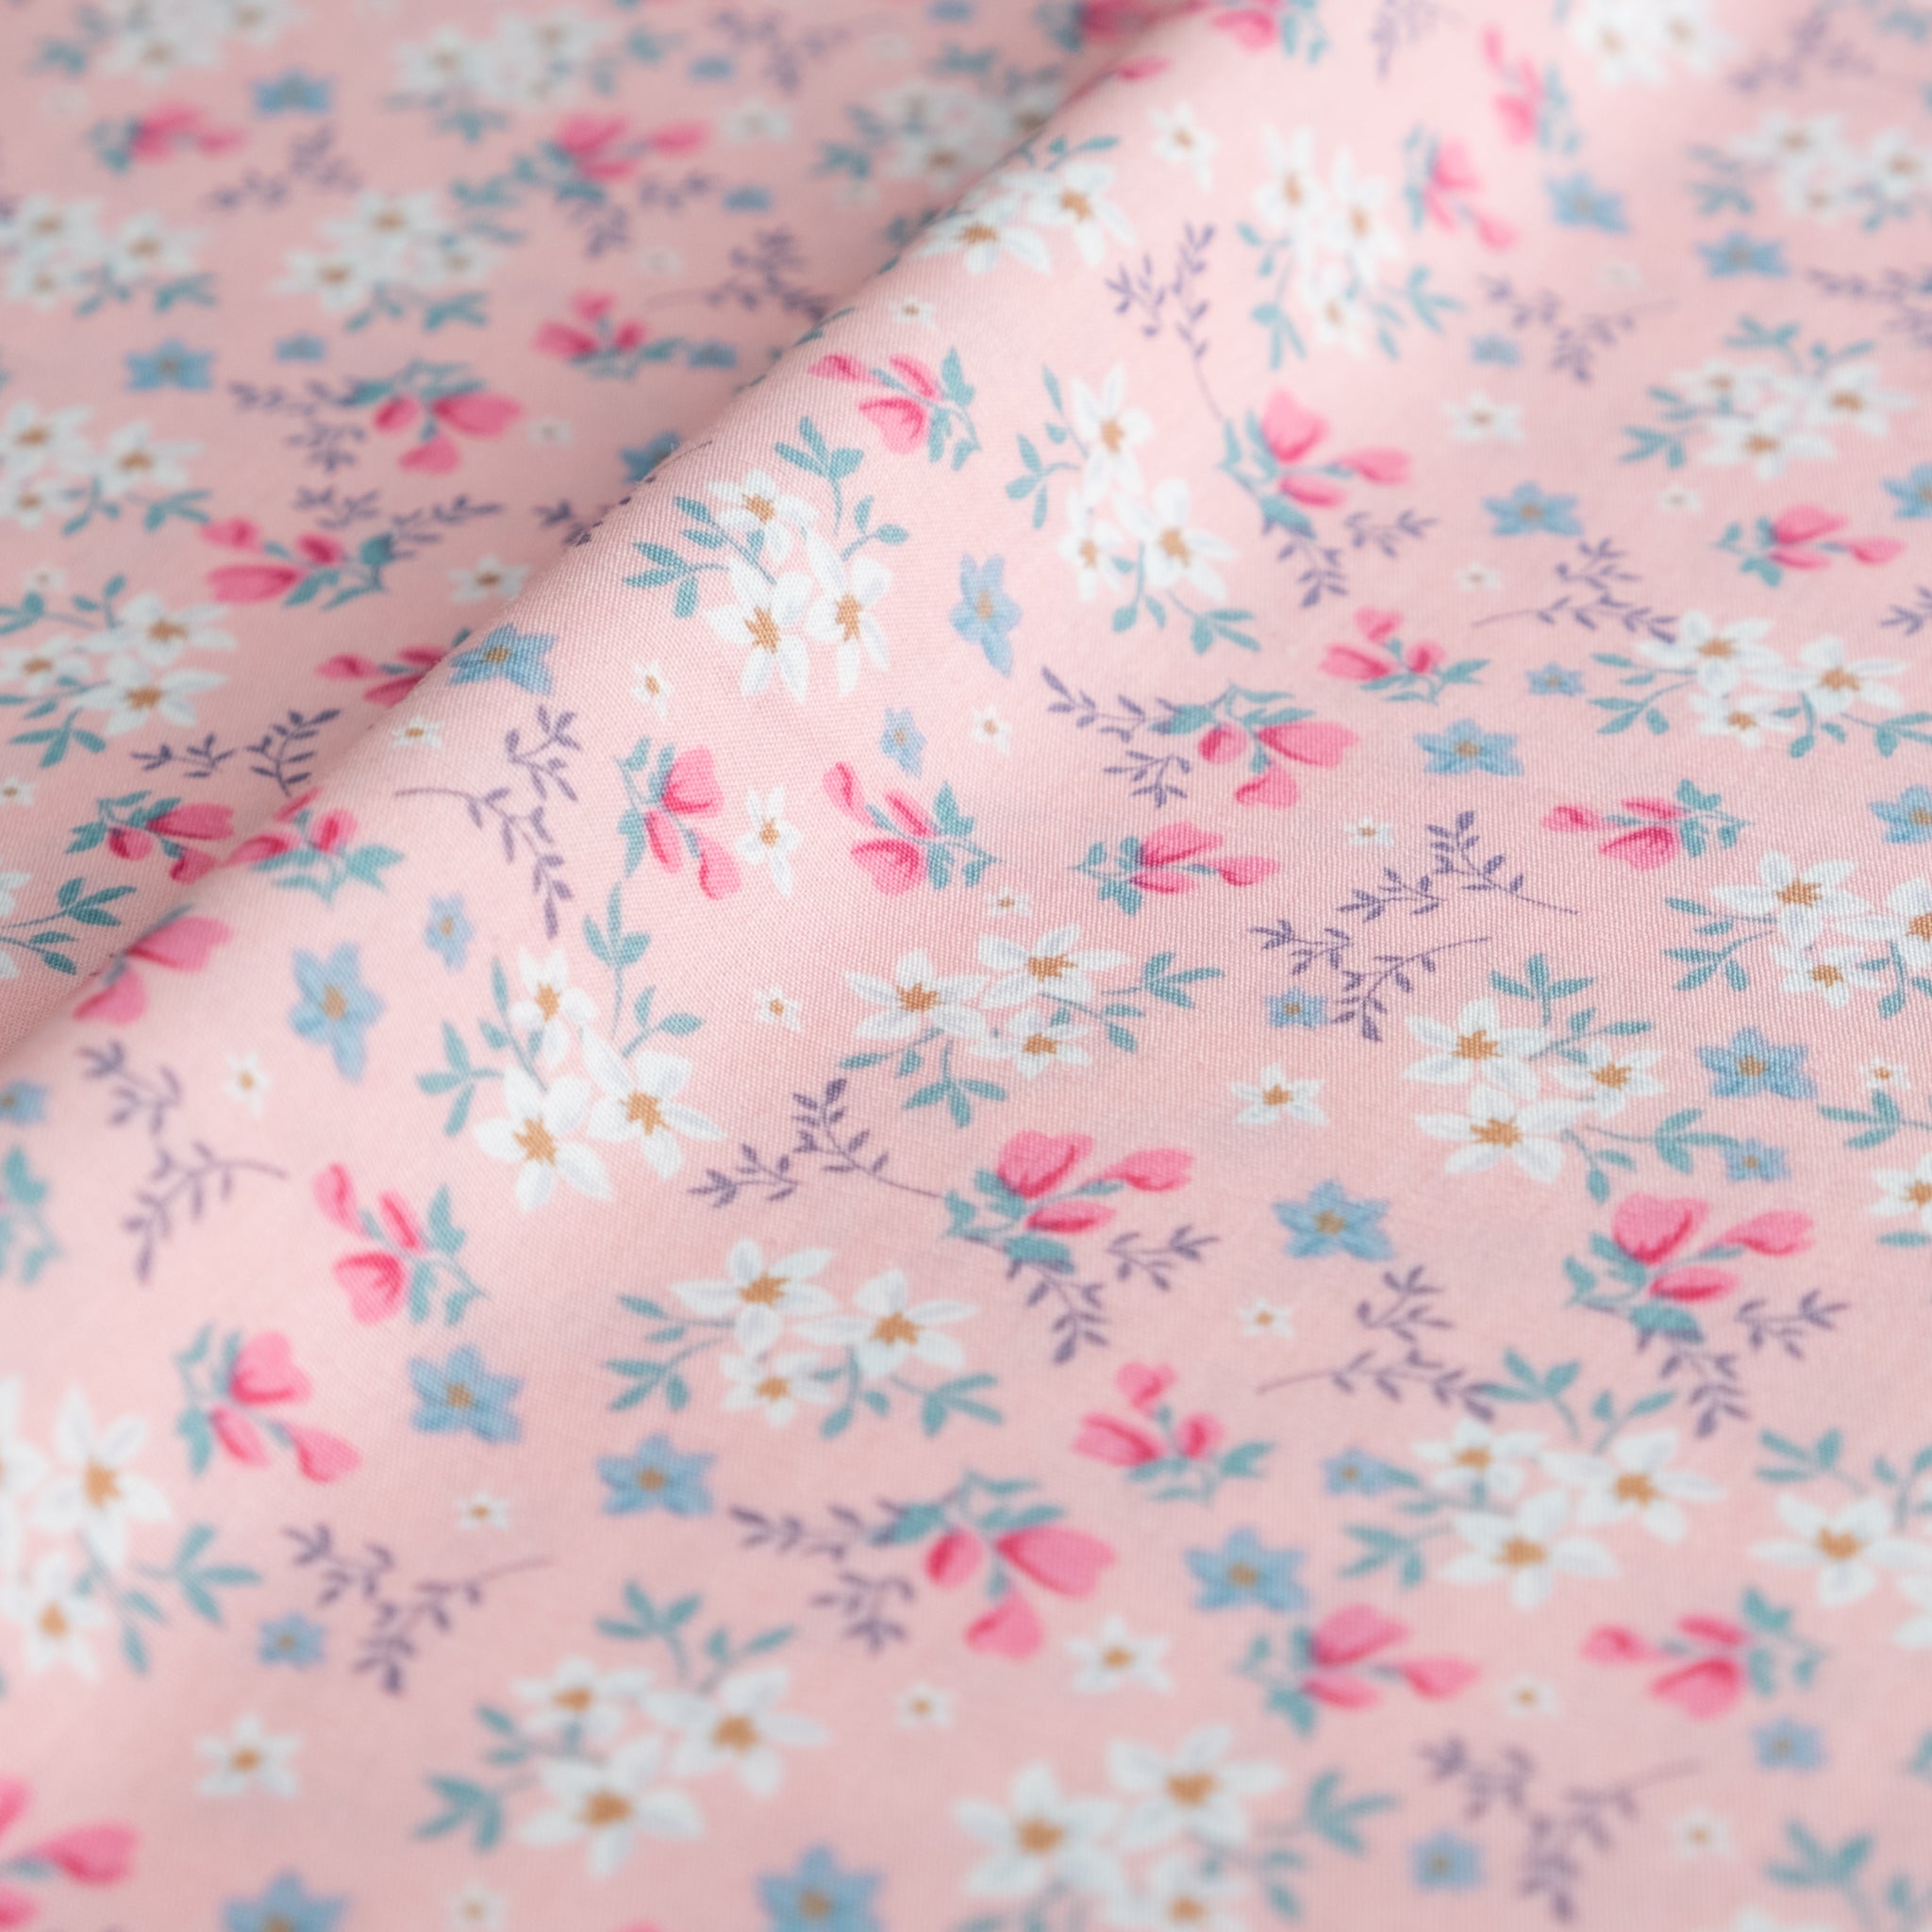 100% Cotton Poplin Fabric Pretty Pink Rose Bud Floral Print on Ivory Craft  Fabric Material by the Metre CP0456IVORY 